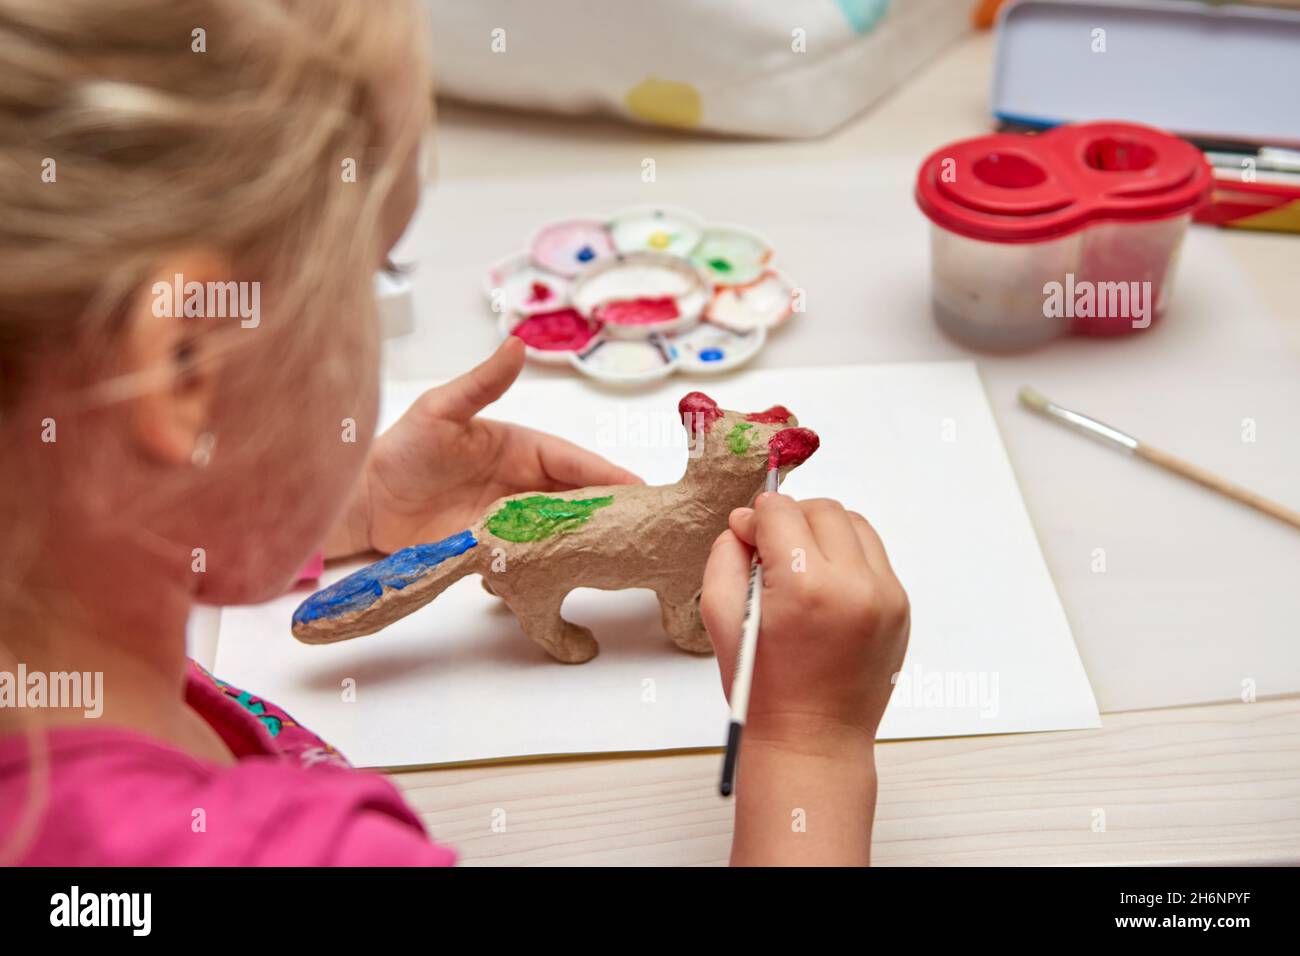 Girl and boy painting paper mache or gibs figurines. Child drawing with acrylic paint for her homeschooling art project crafts. Stock Photo